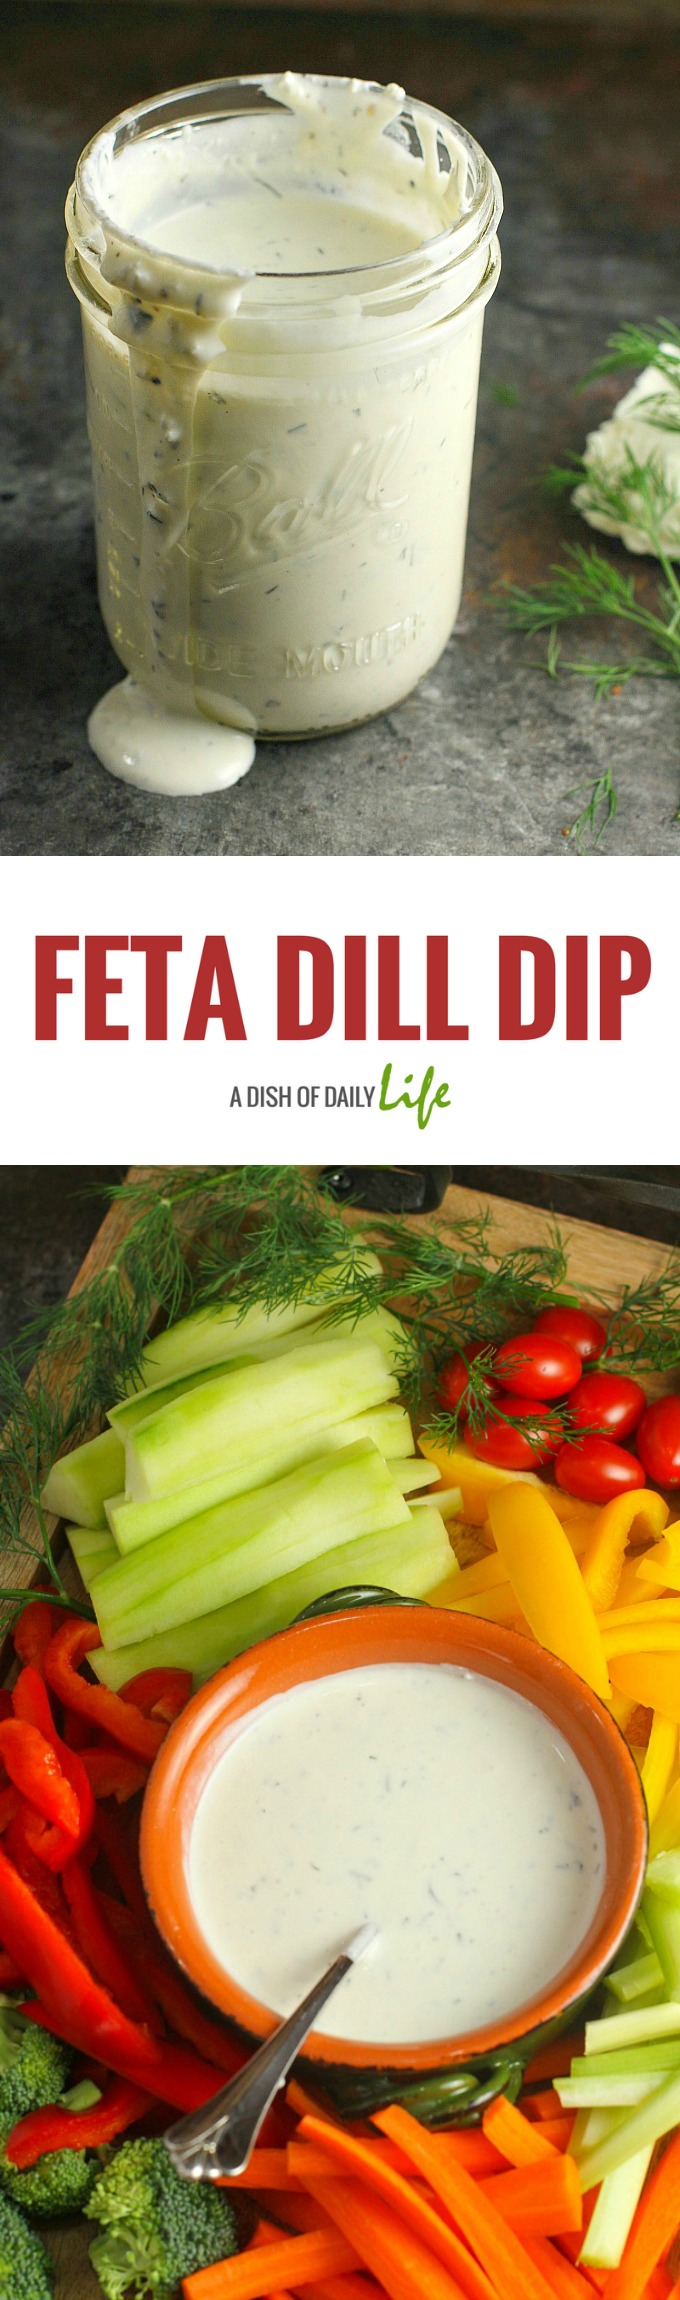 This homemade Feta Dill Dip is a perfect addition to a Crudité platter for any party — and works great as a salad dressing as well! #Appetizer | #Dip | #Feta | #Dill | #SaladDressing